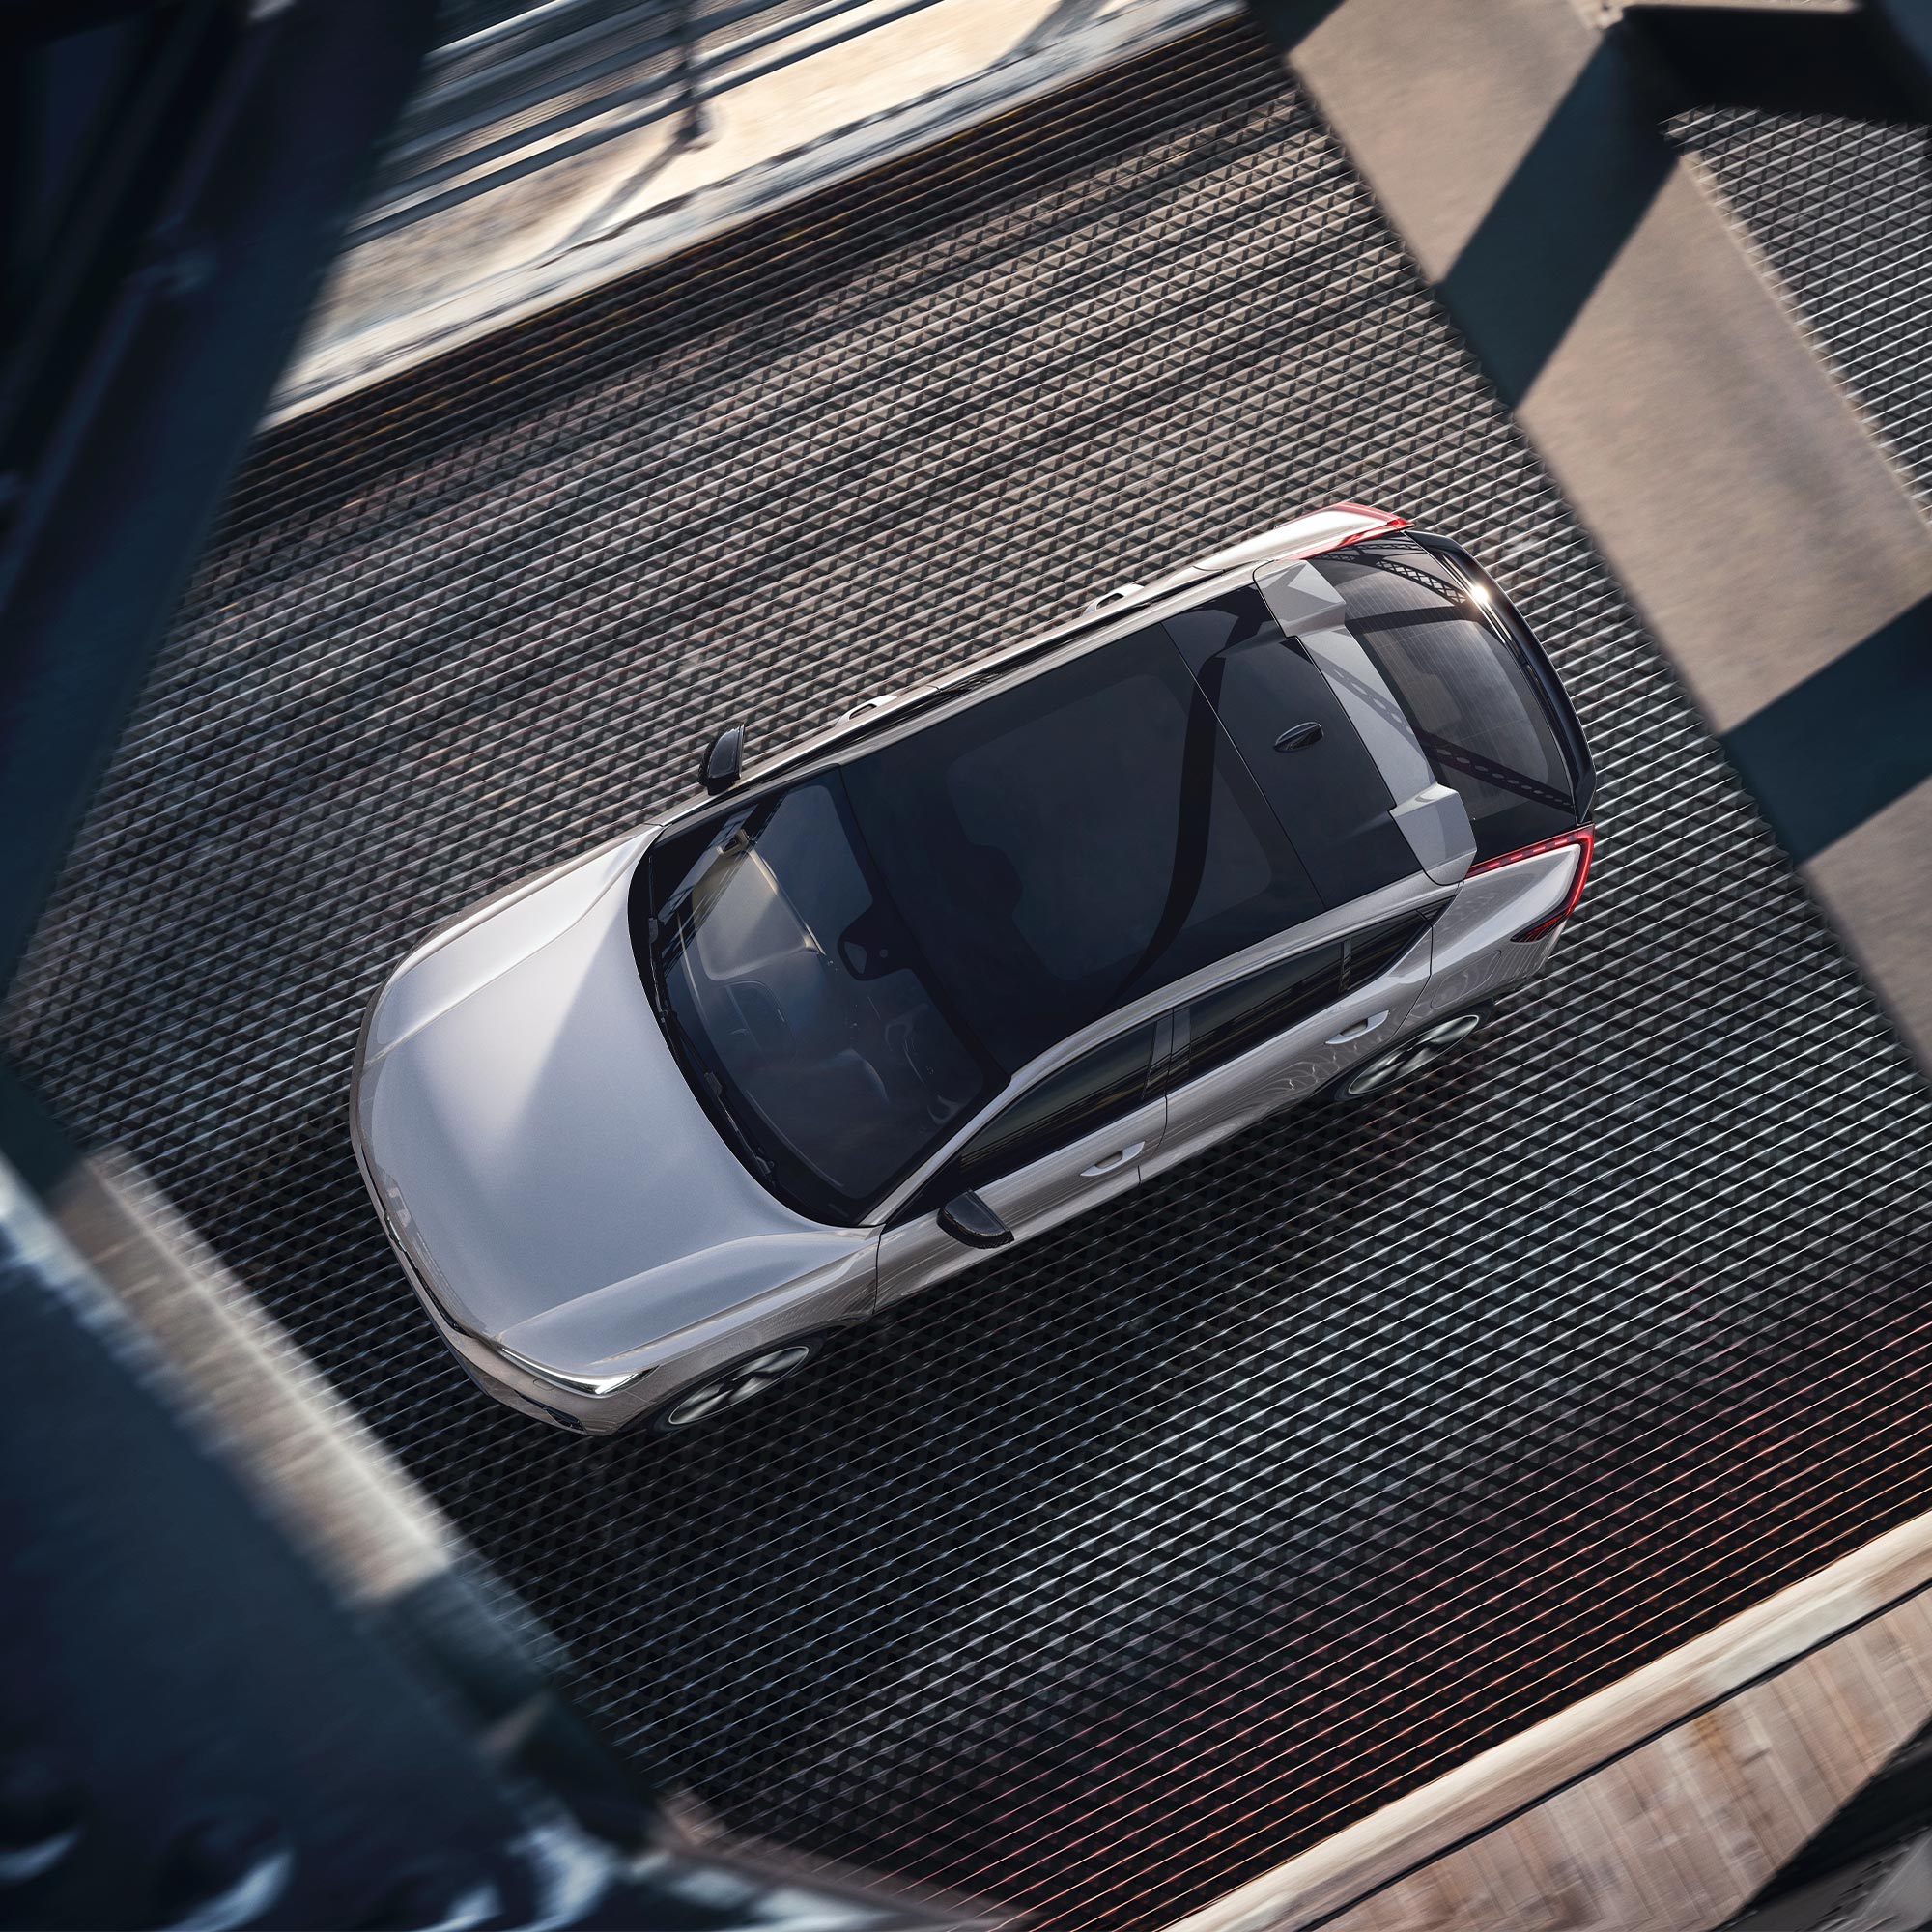 The Volvo C40 Recharge panoramic roof seen from above.